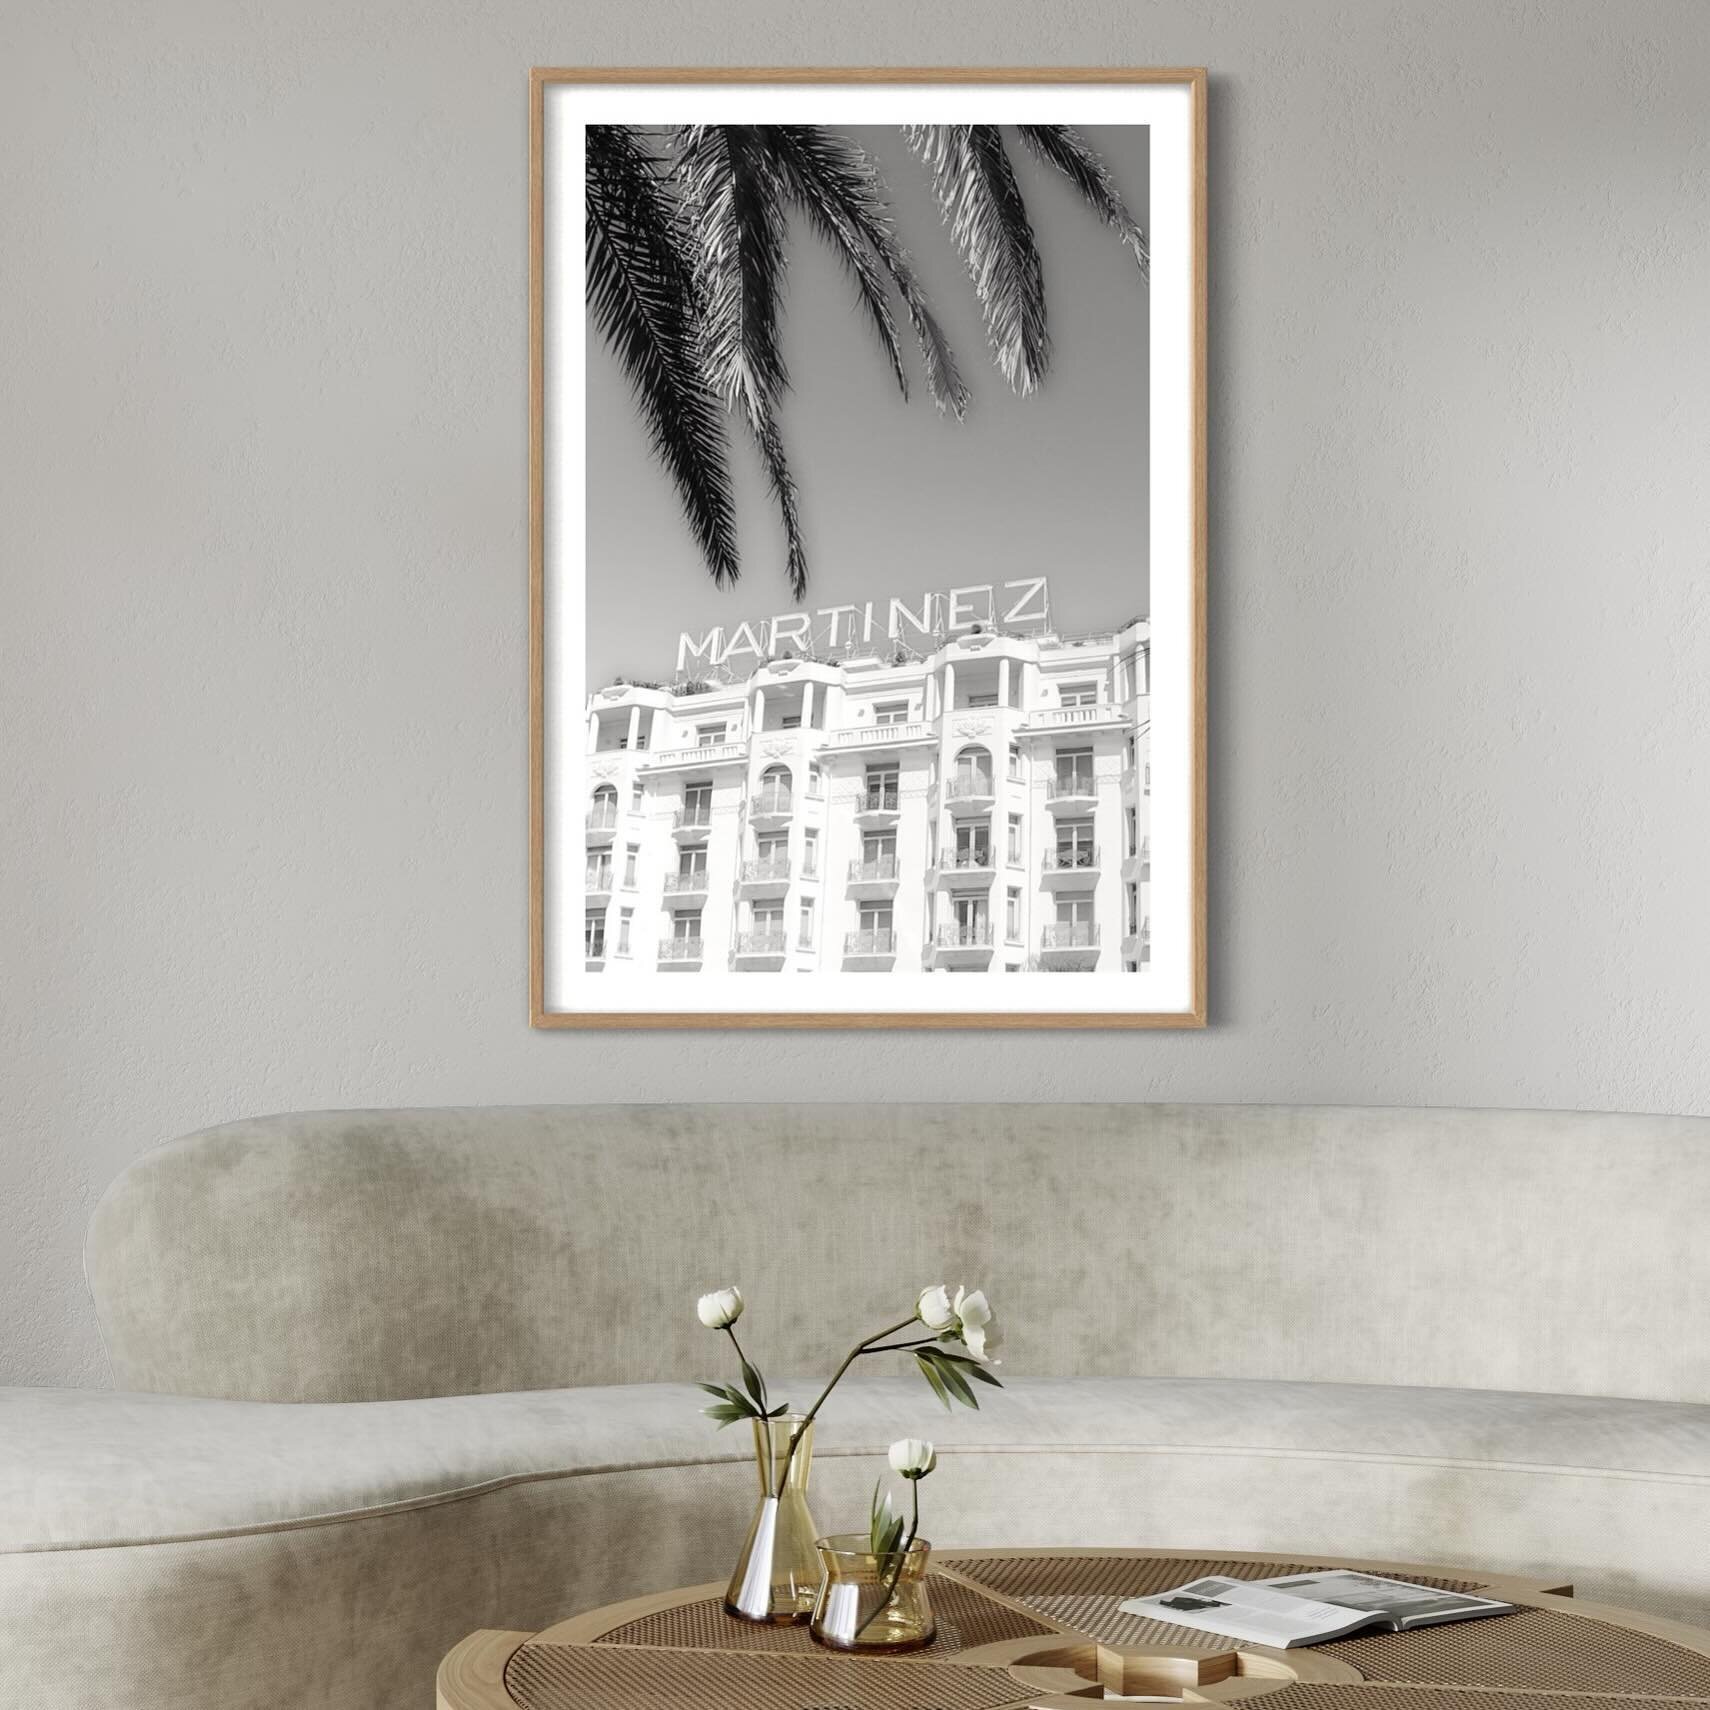 Hotel Martinez, Cannes.

Now available in all of the usual sizes. See website for more information.

#martinez #cannes #hotel #icon #legend #art #photo #photography #summer #sun #sunset #travel #holiday #vacation #car #architecture #antibes #capdanti